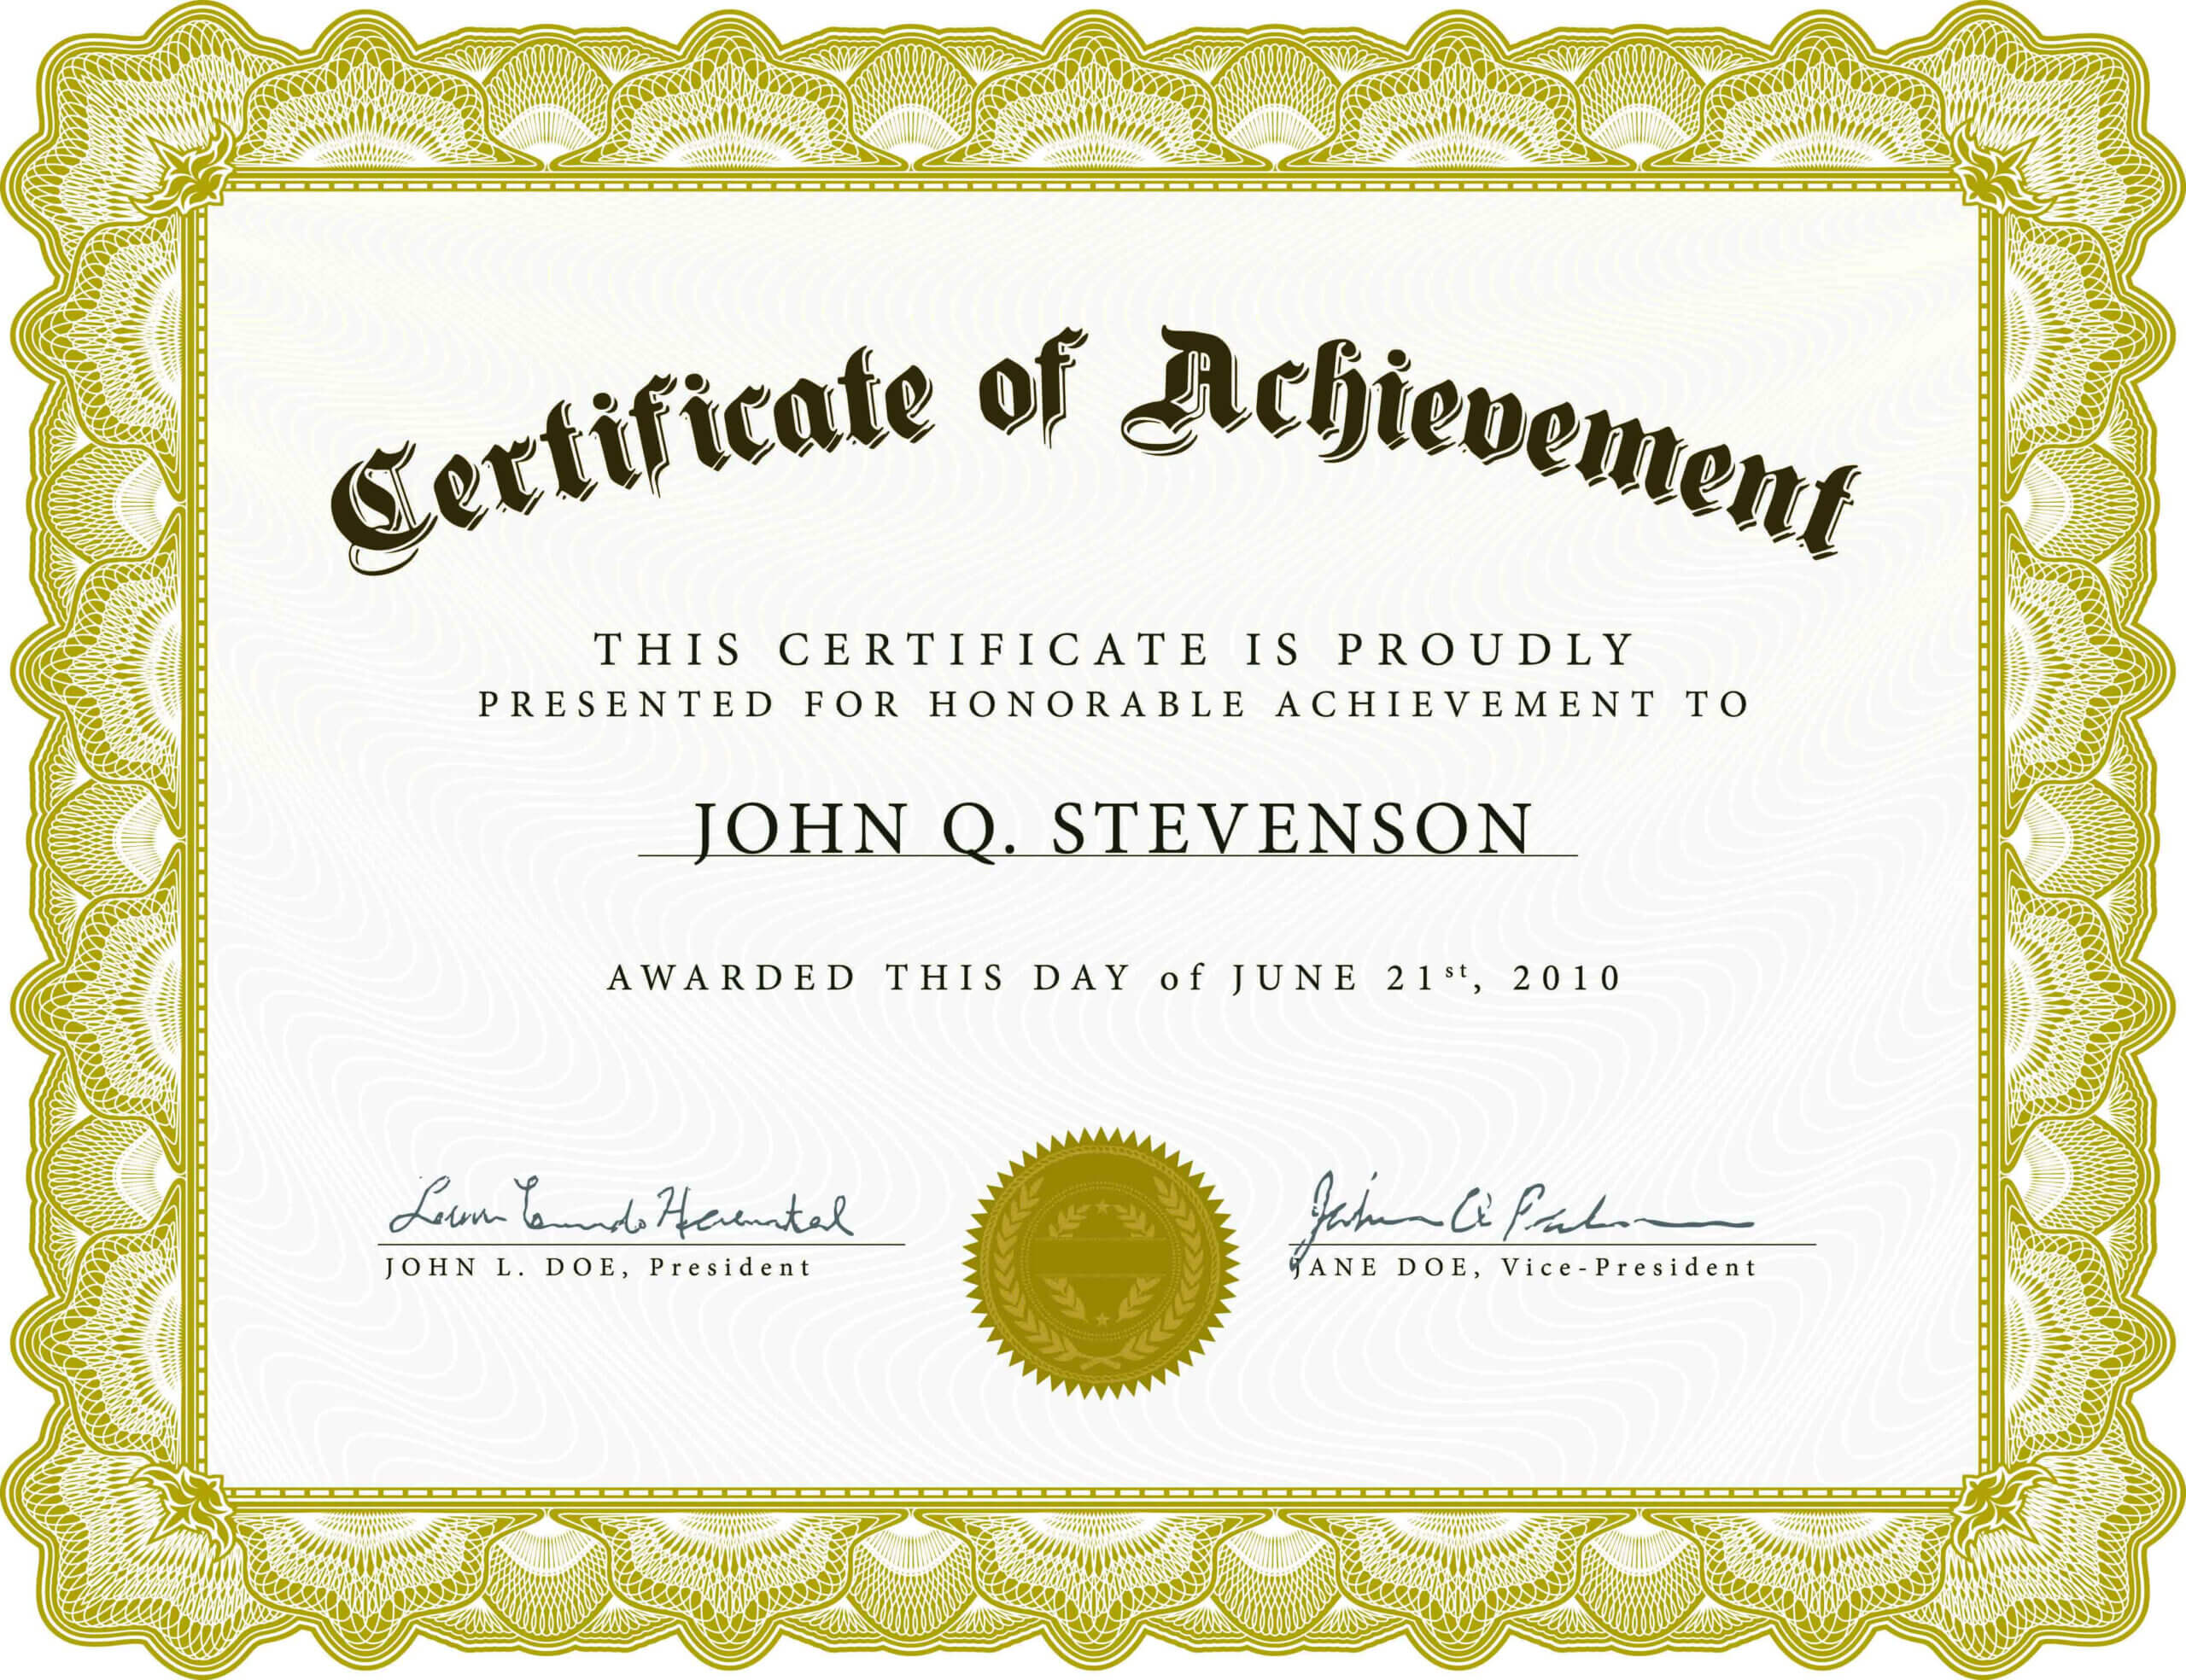 Certificate Of Academic Achievement Template | Photo Stock Intended For Blank Certificate Of Achievement Template